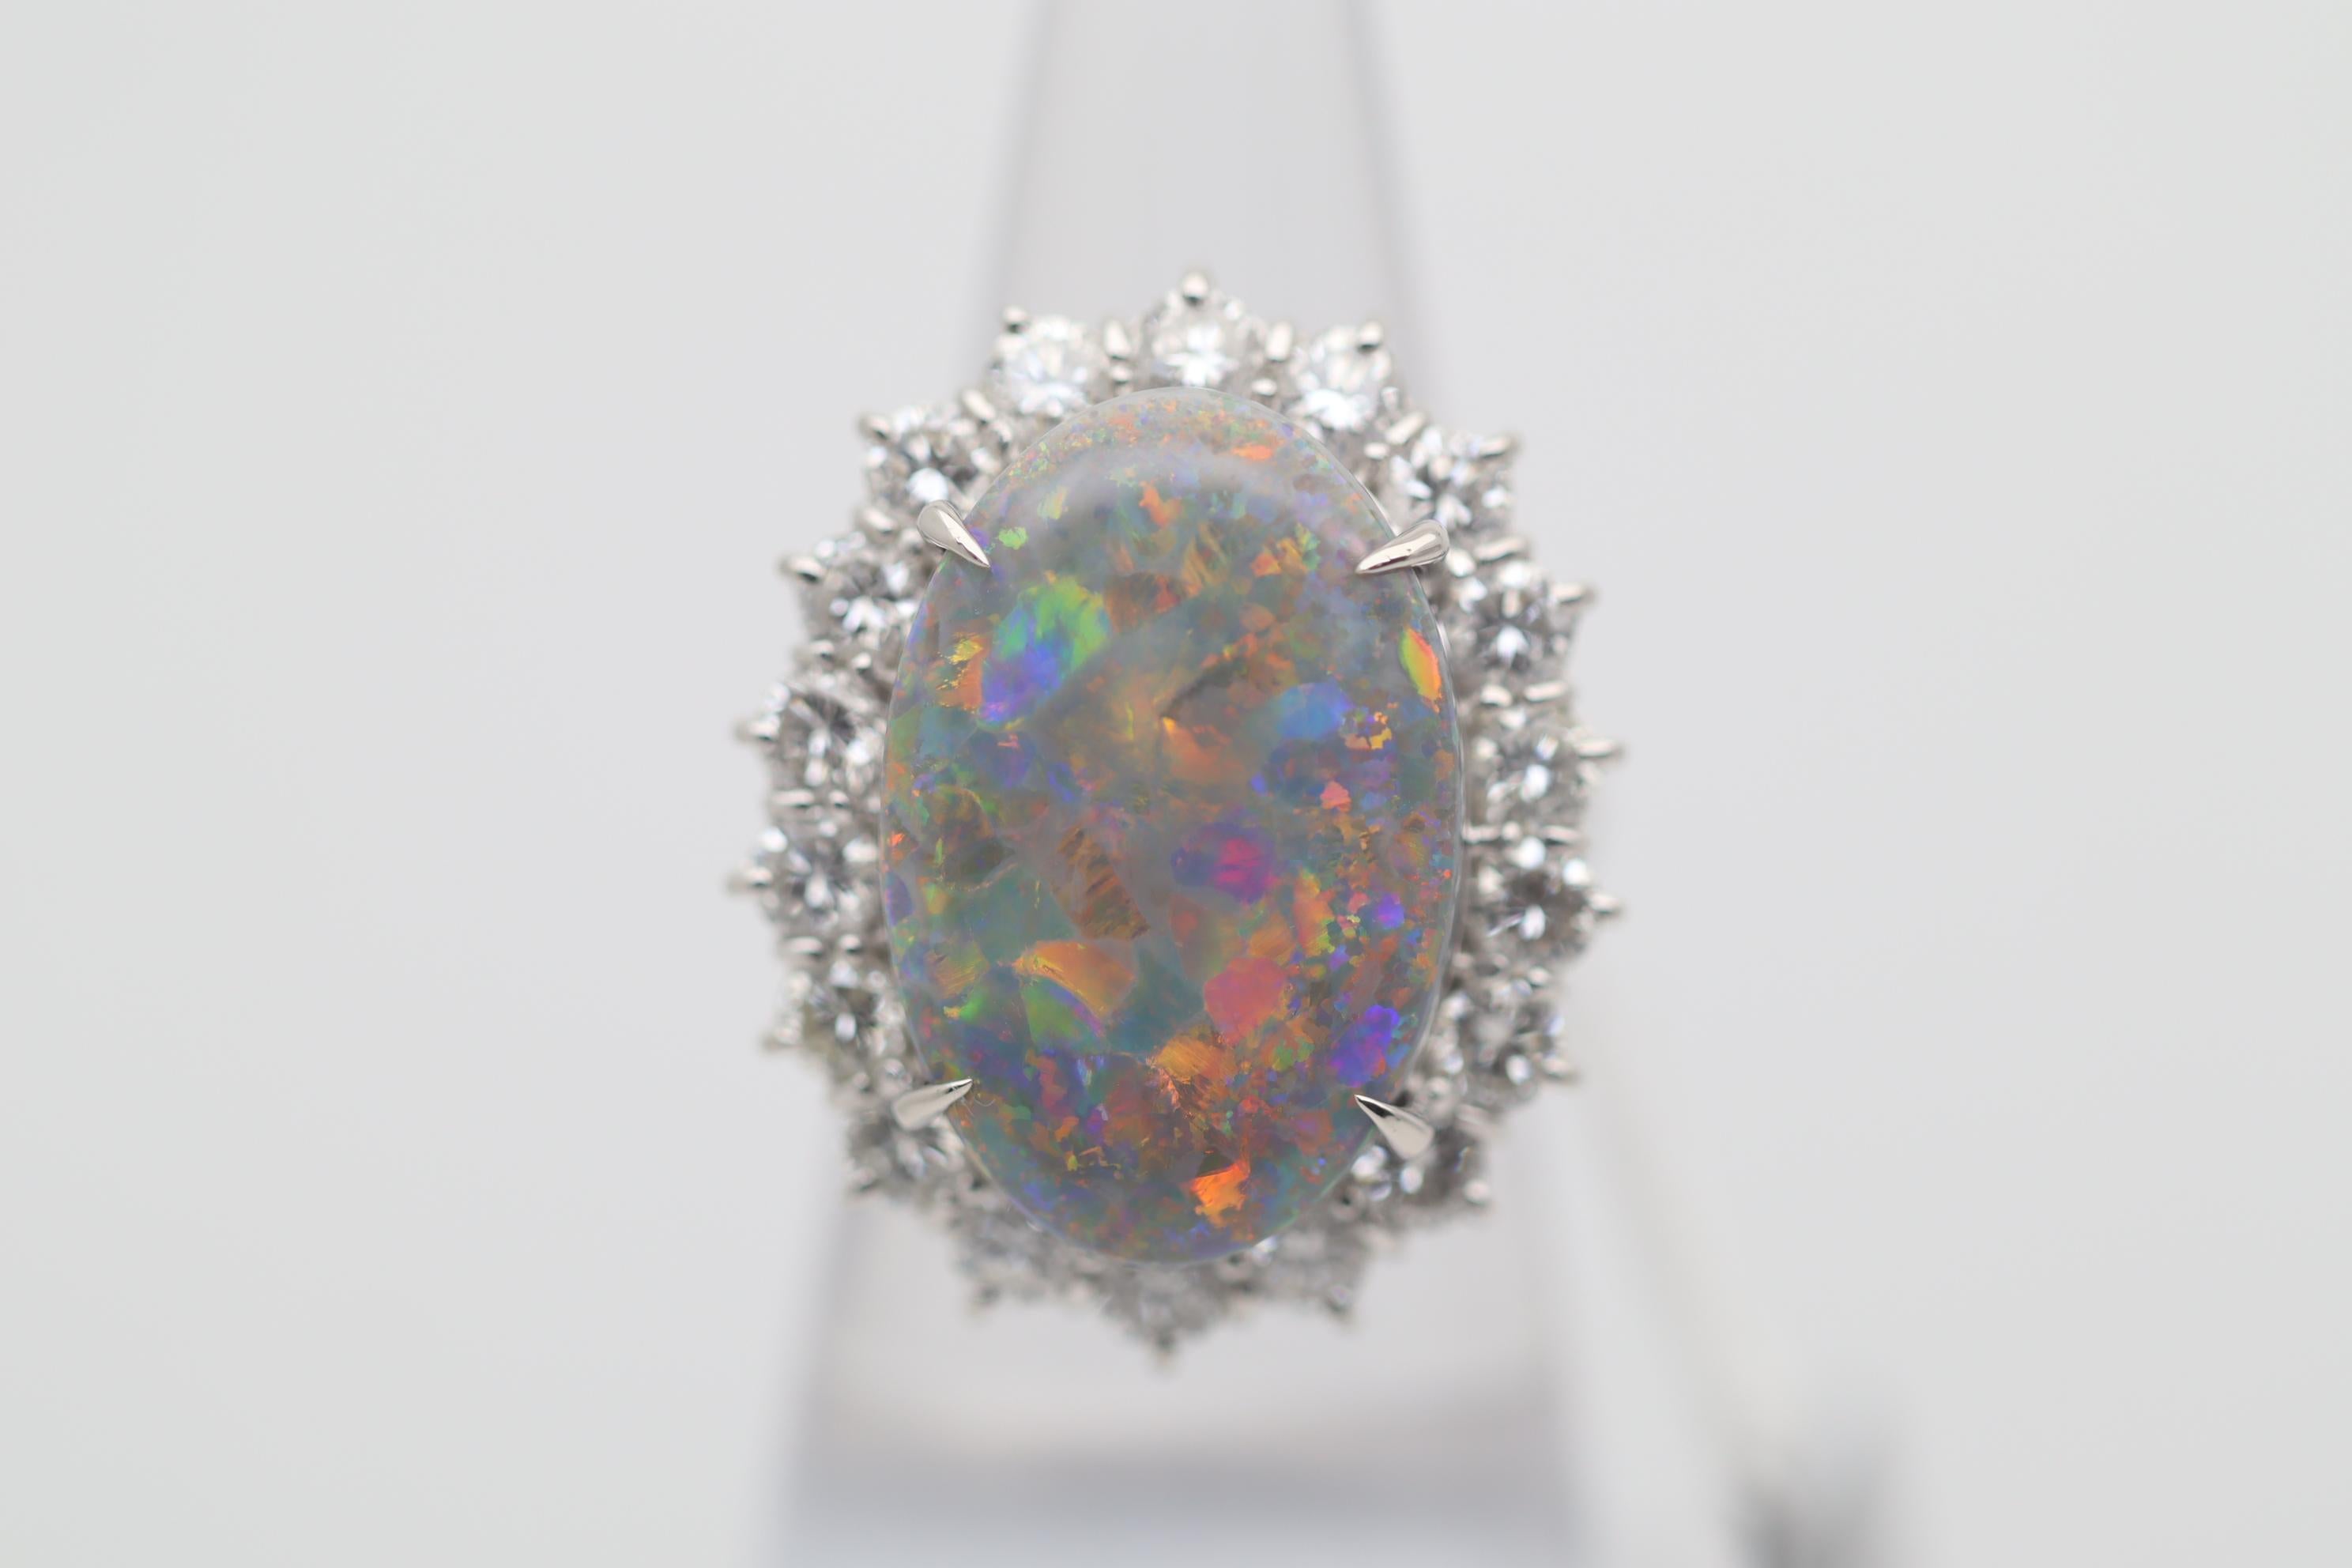 A large, impressive and beautiful black opal from Australia takes center stage! It weighs 12.94 carats and has excellent play-of-color as bright flashes of color dance across the entire stone. The main colors are orange and red making this piece